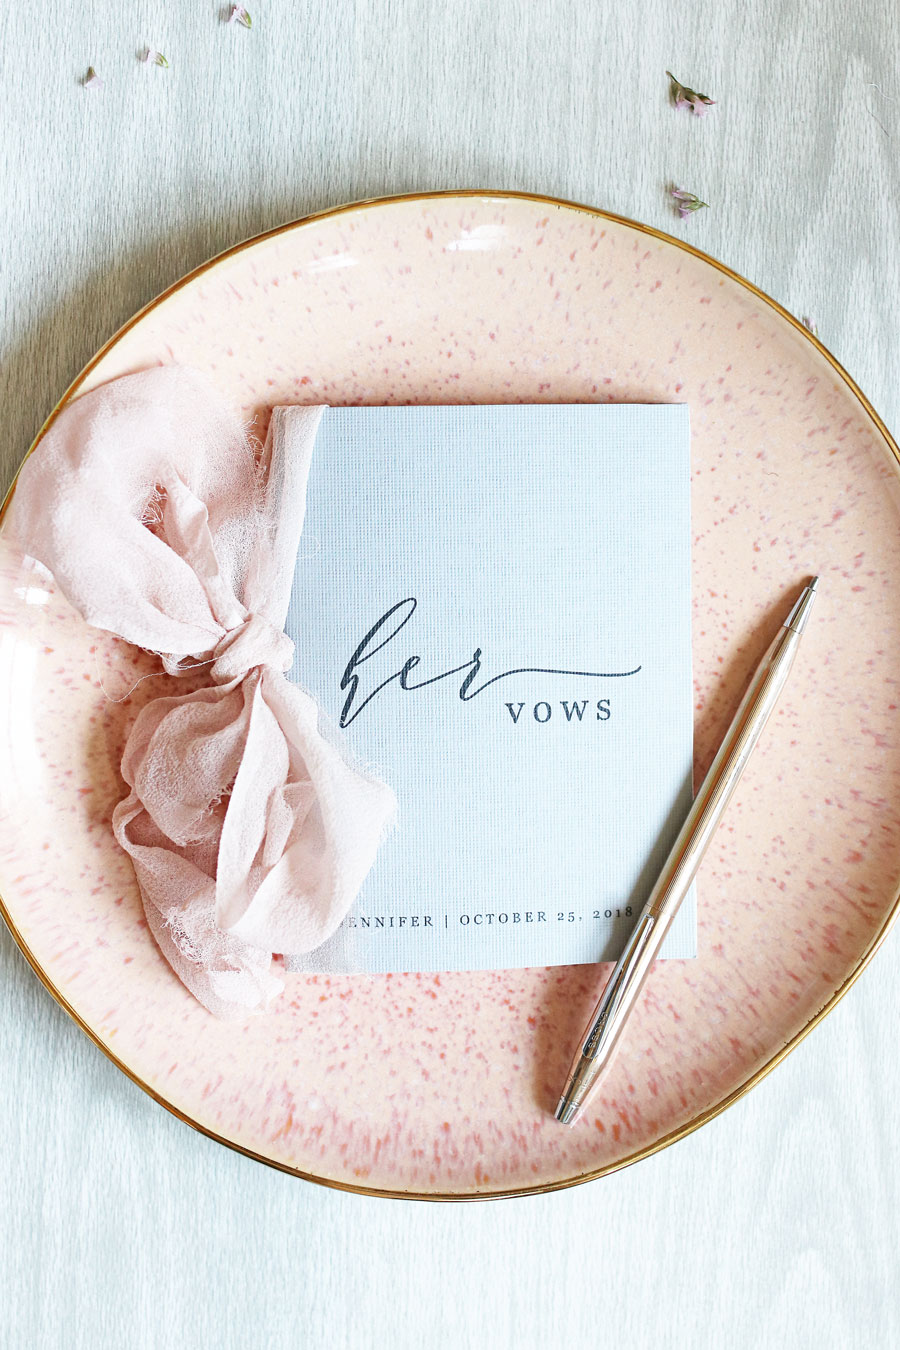 DIY Vow Books for Your Wedding Day